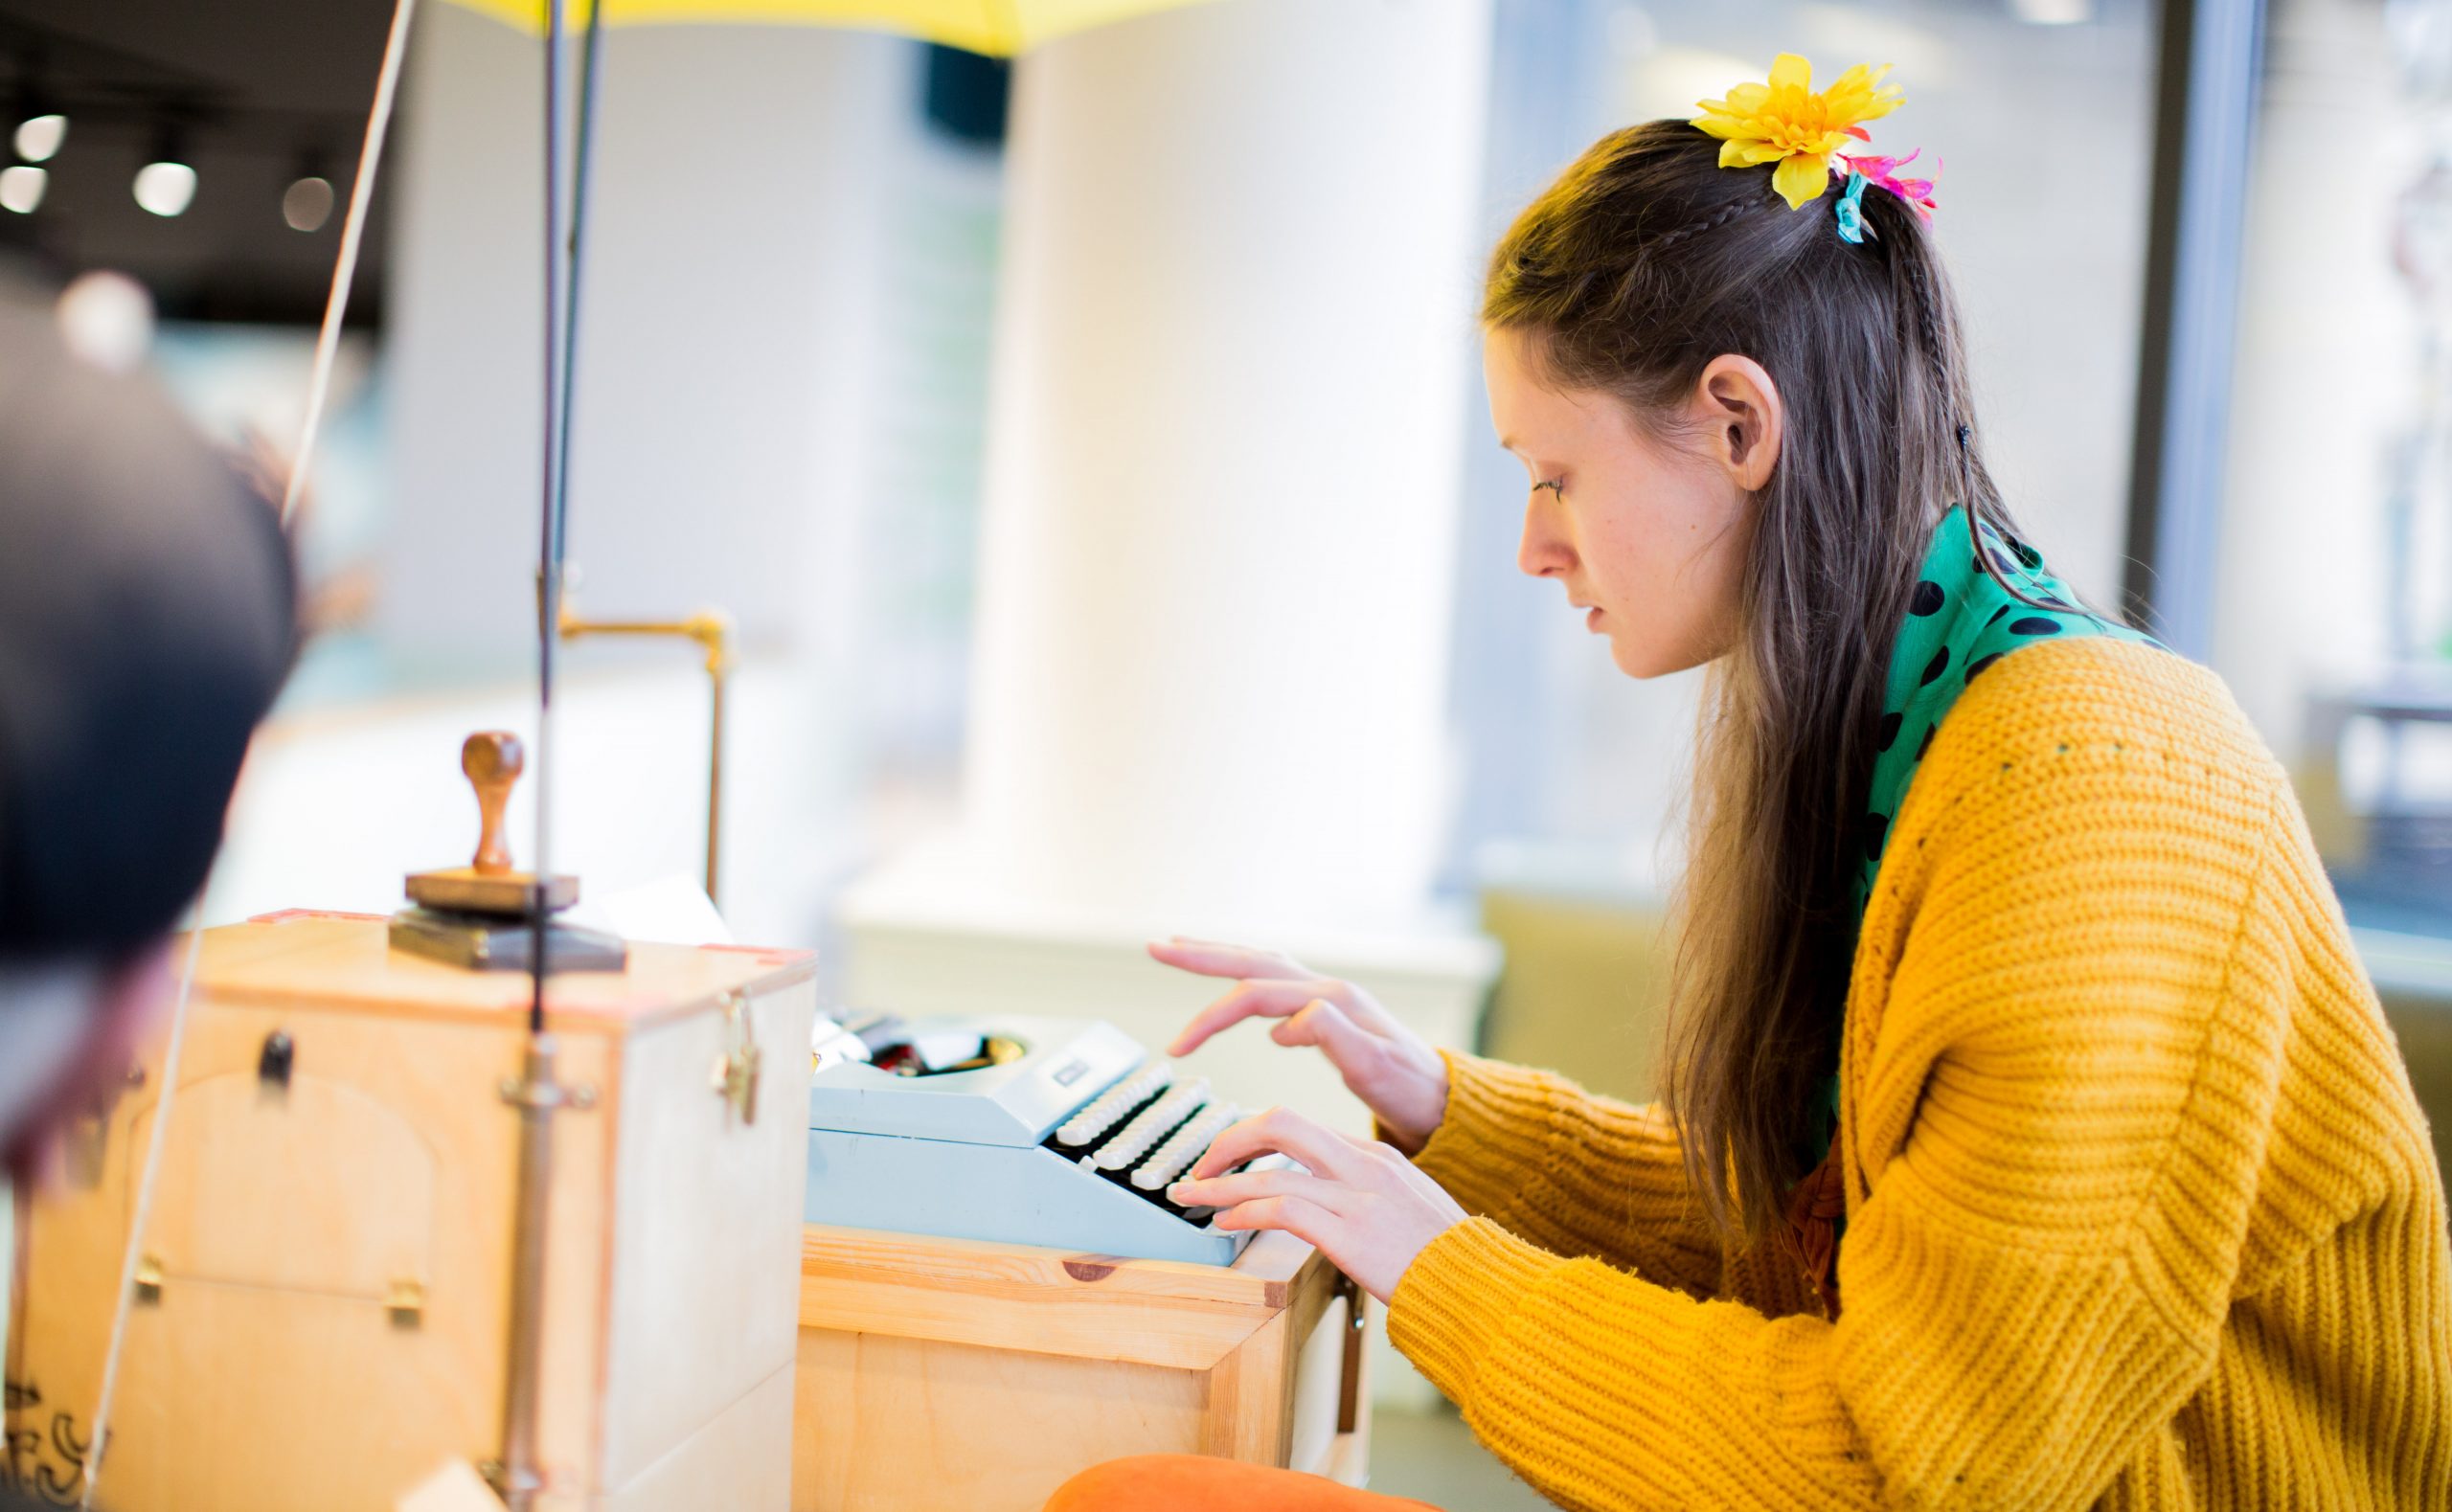 A woman in a yellow jumper with flowers in her hair types on a typewriter